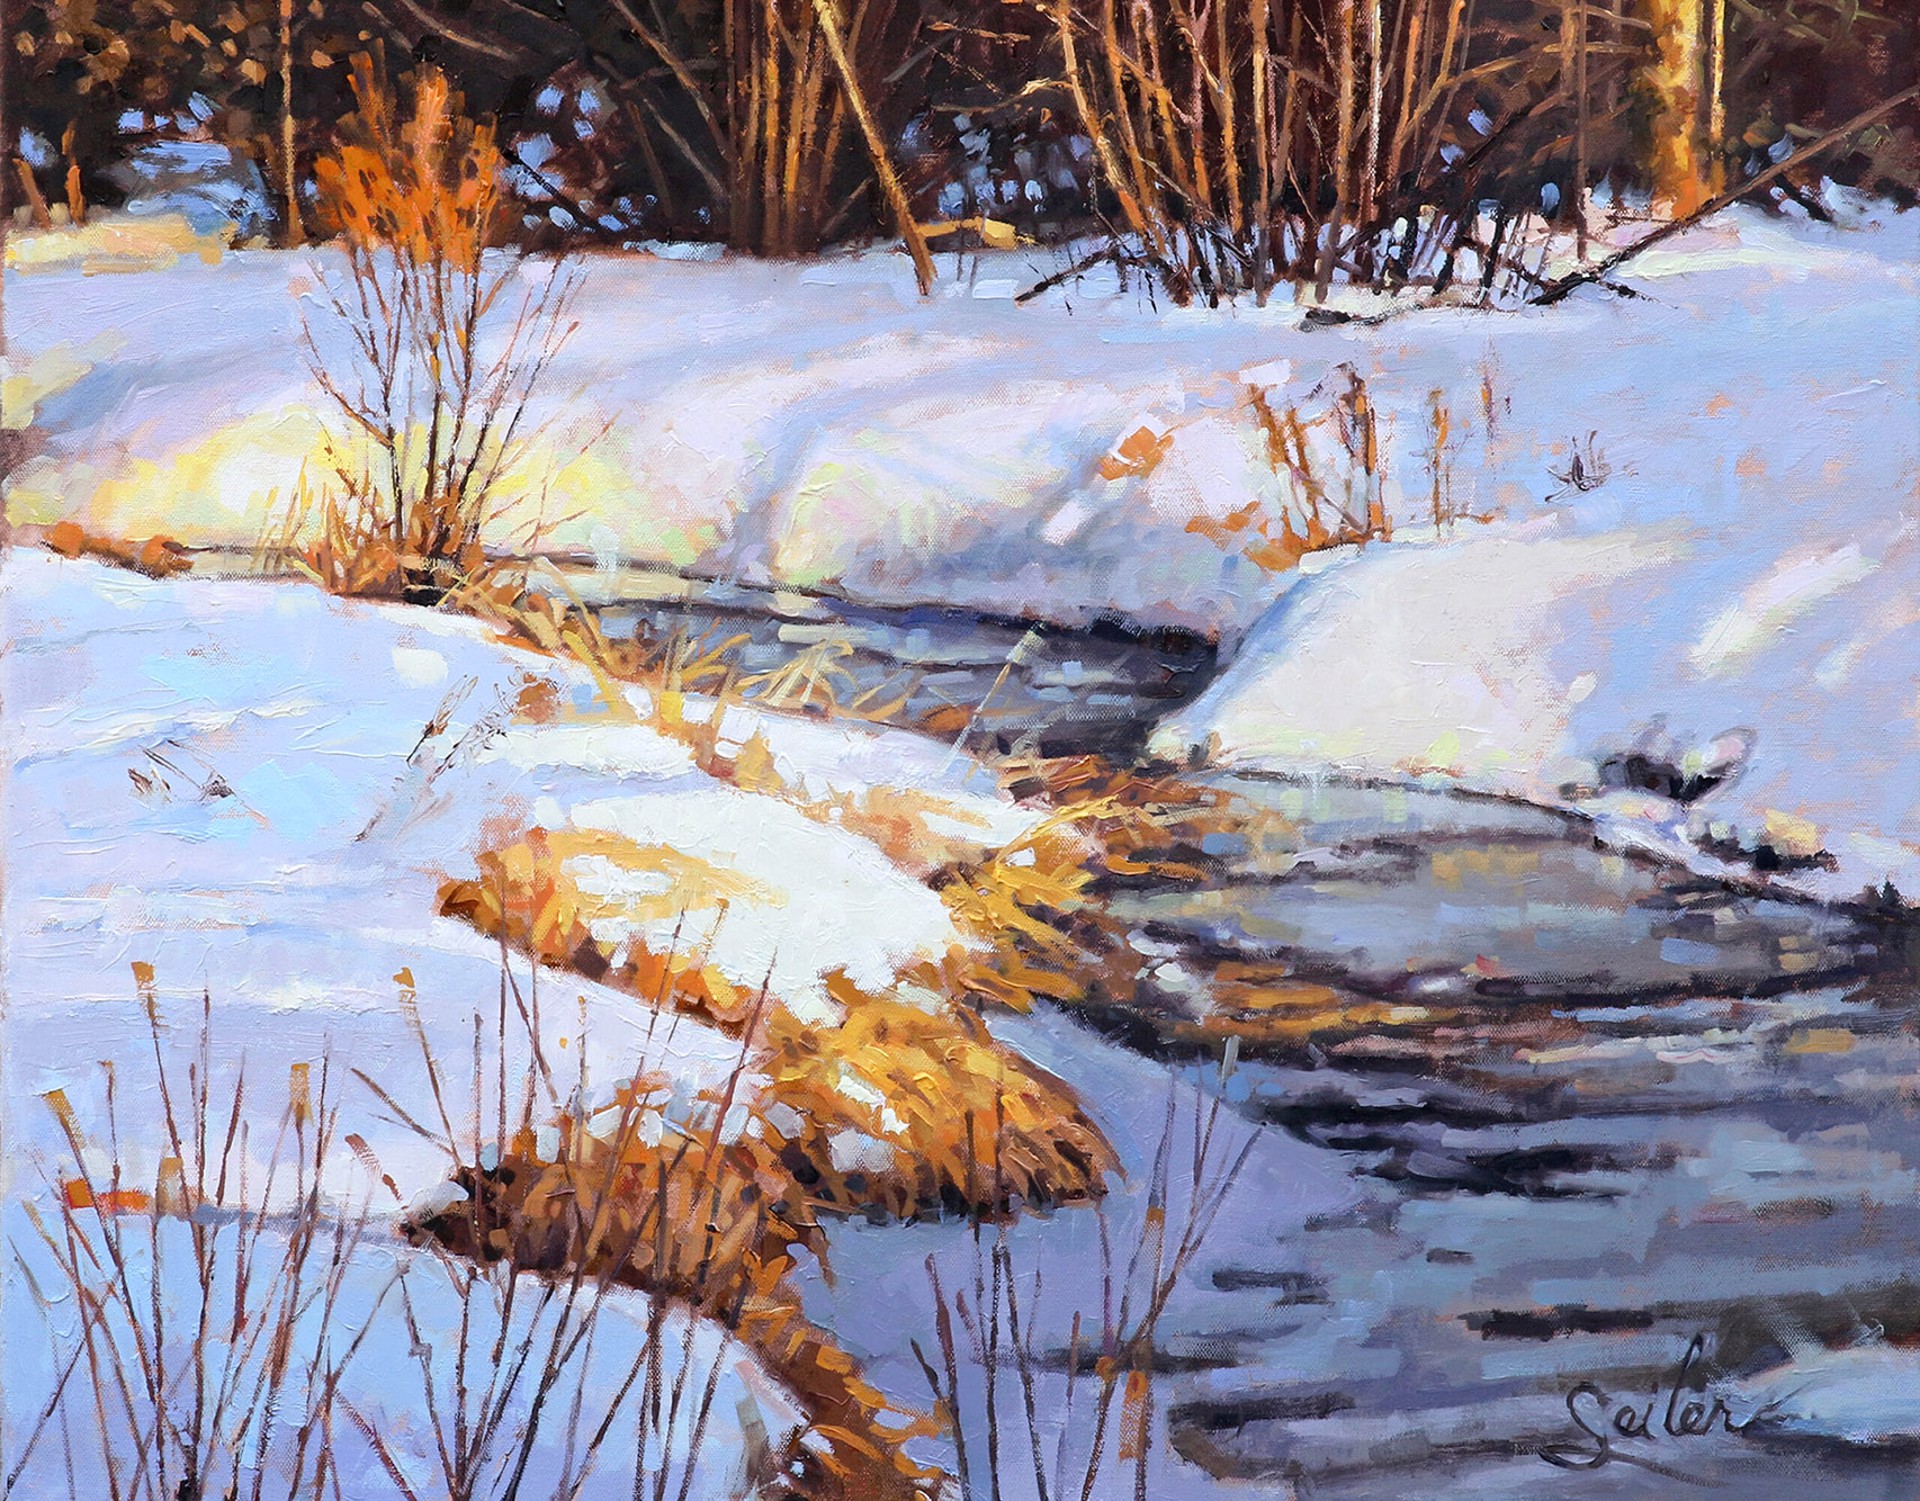 Larry Seiler "Last Light on the Torpee" by Oil Painters of America